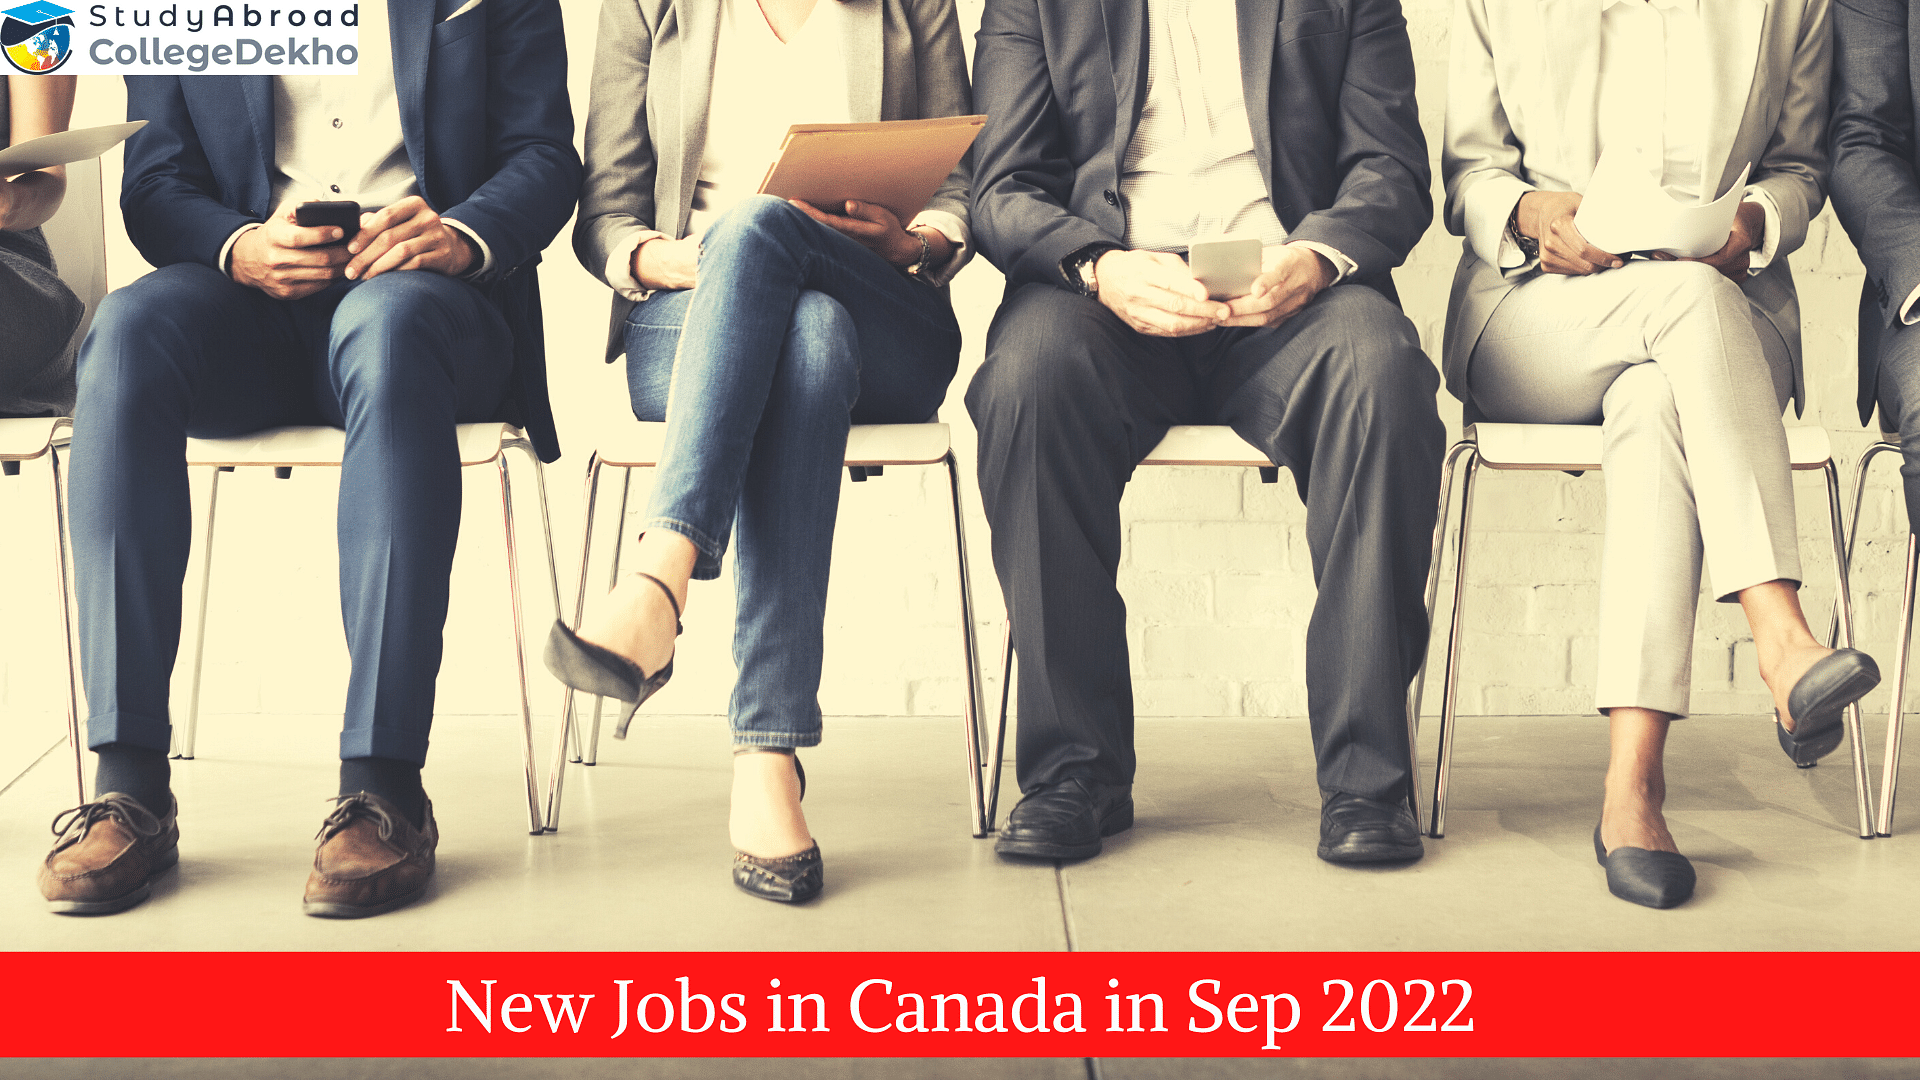 New Jobs in Canada in Sep 2022